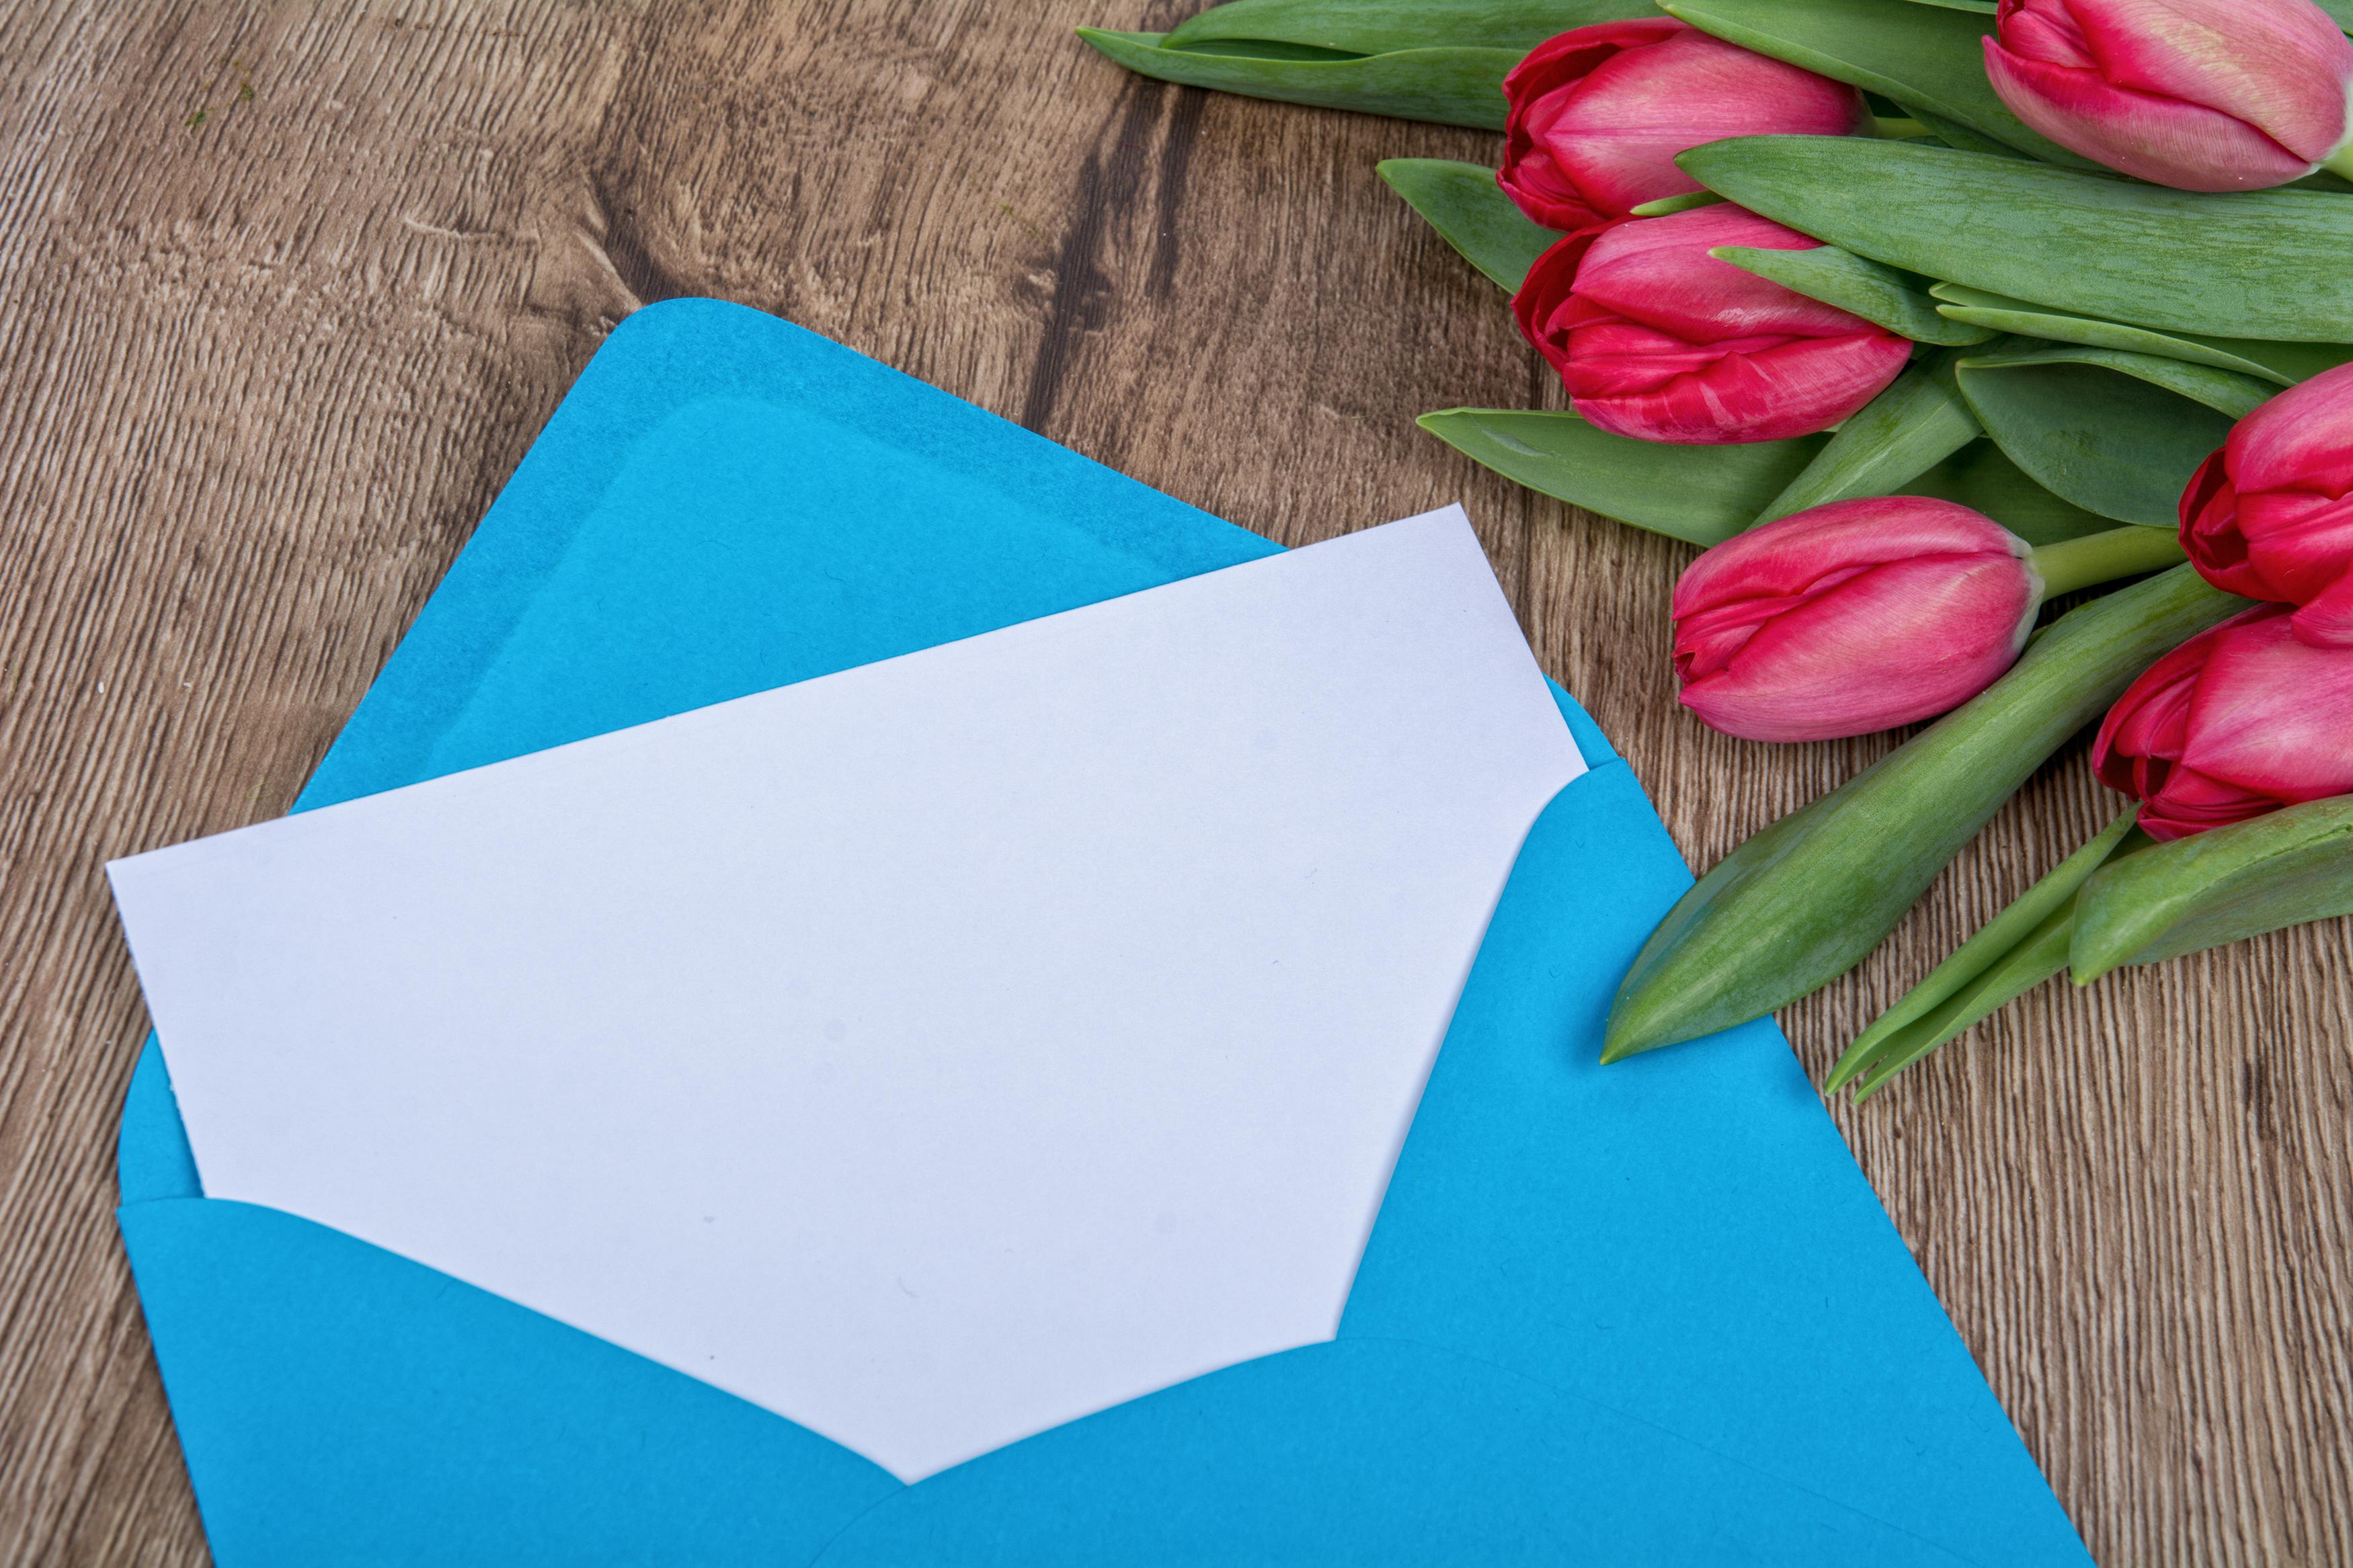 Flowers with a note | Source: Pexels